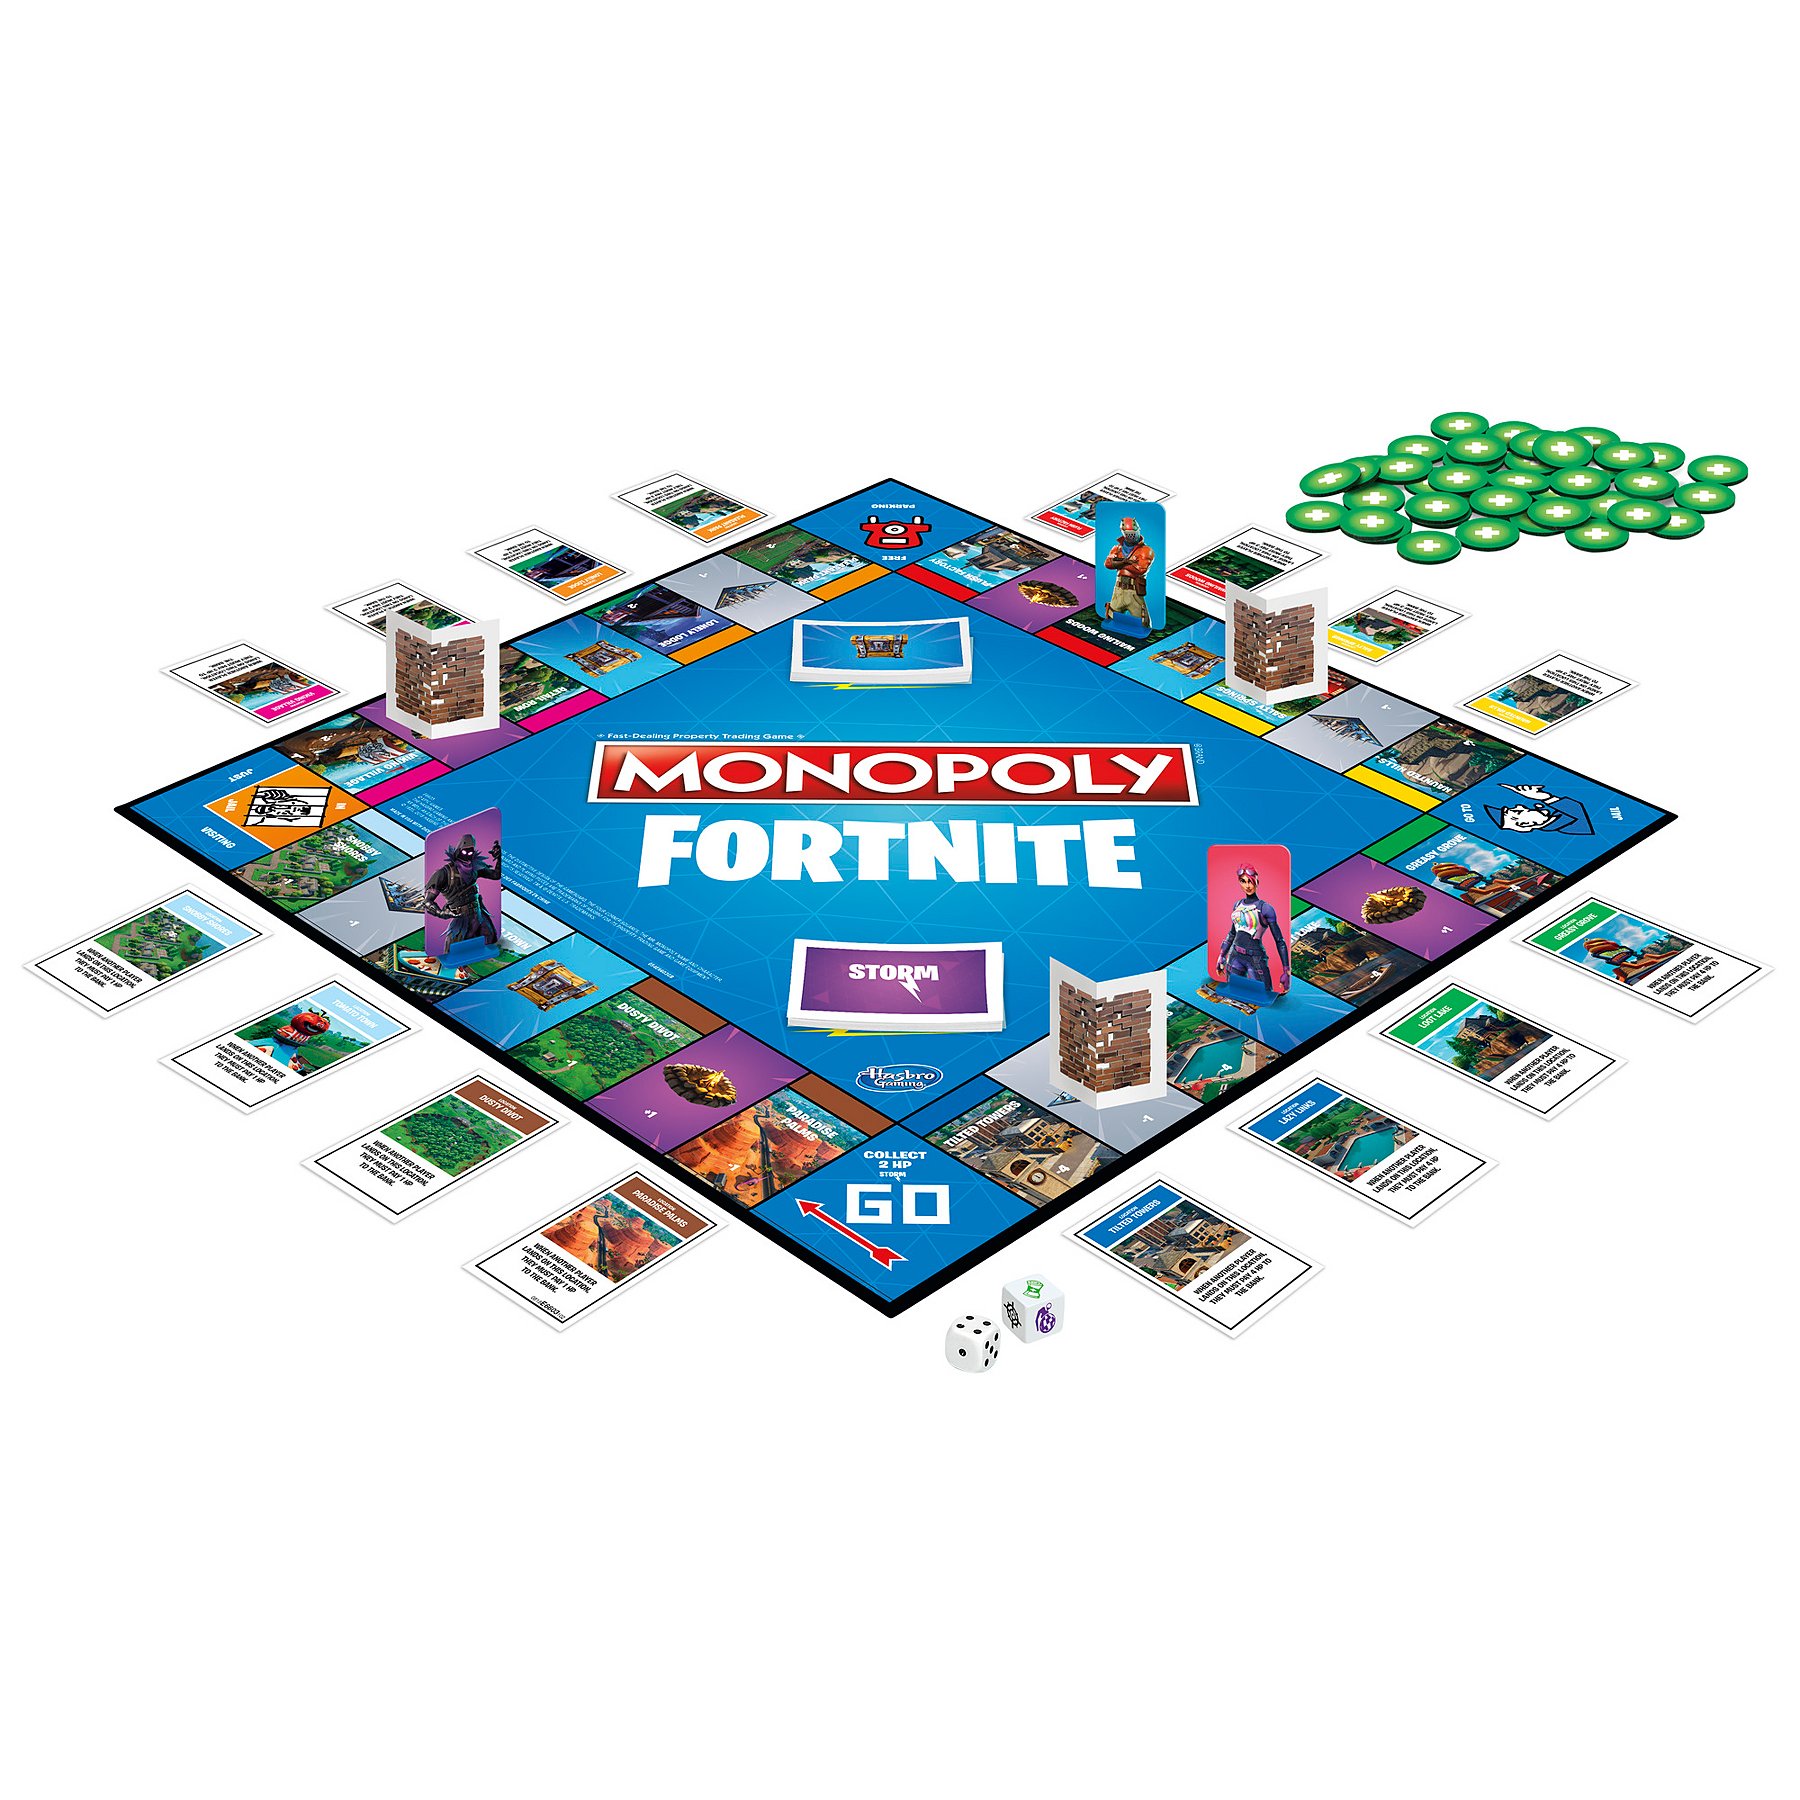 Monopoly Fortnite Edition Board Game Inspired By Fortnite Video - reset